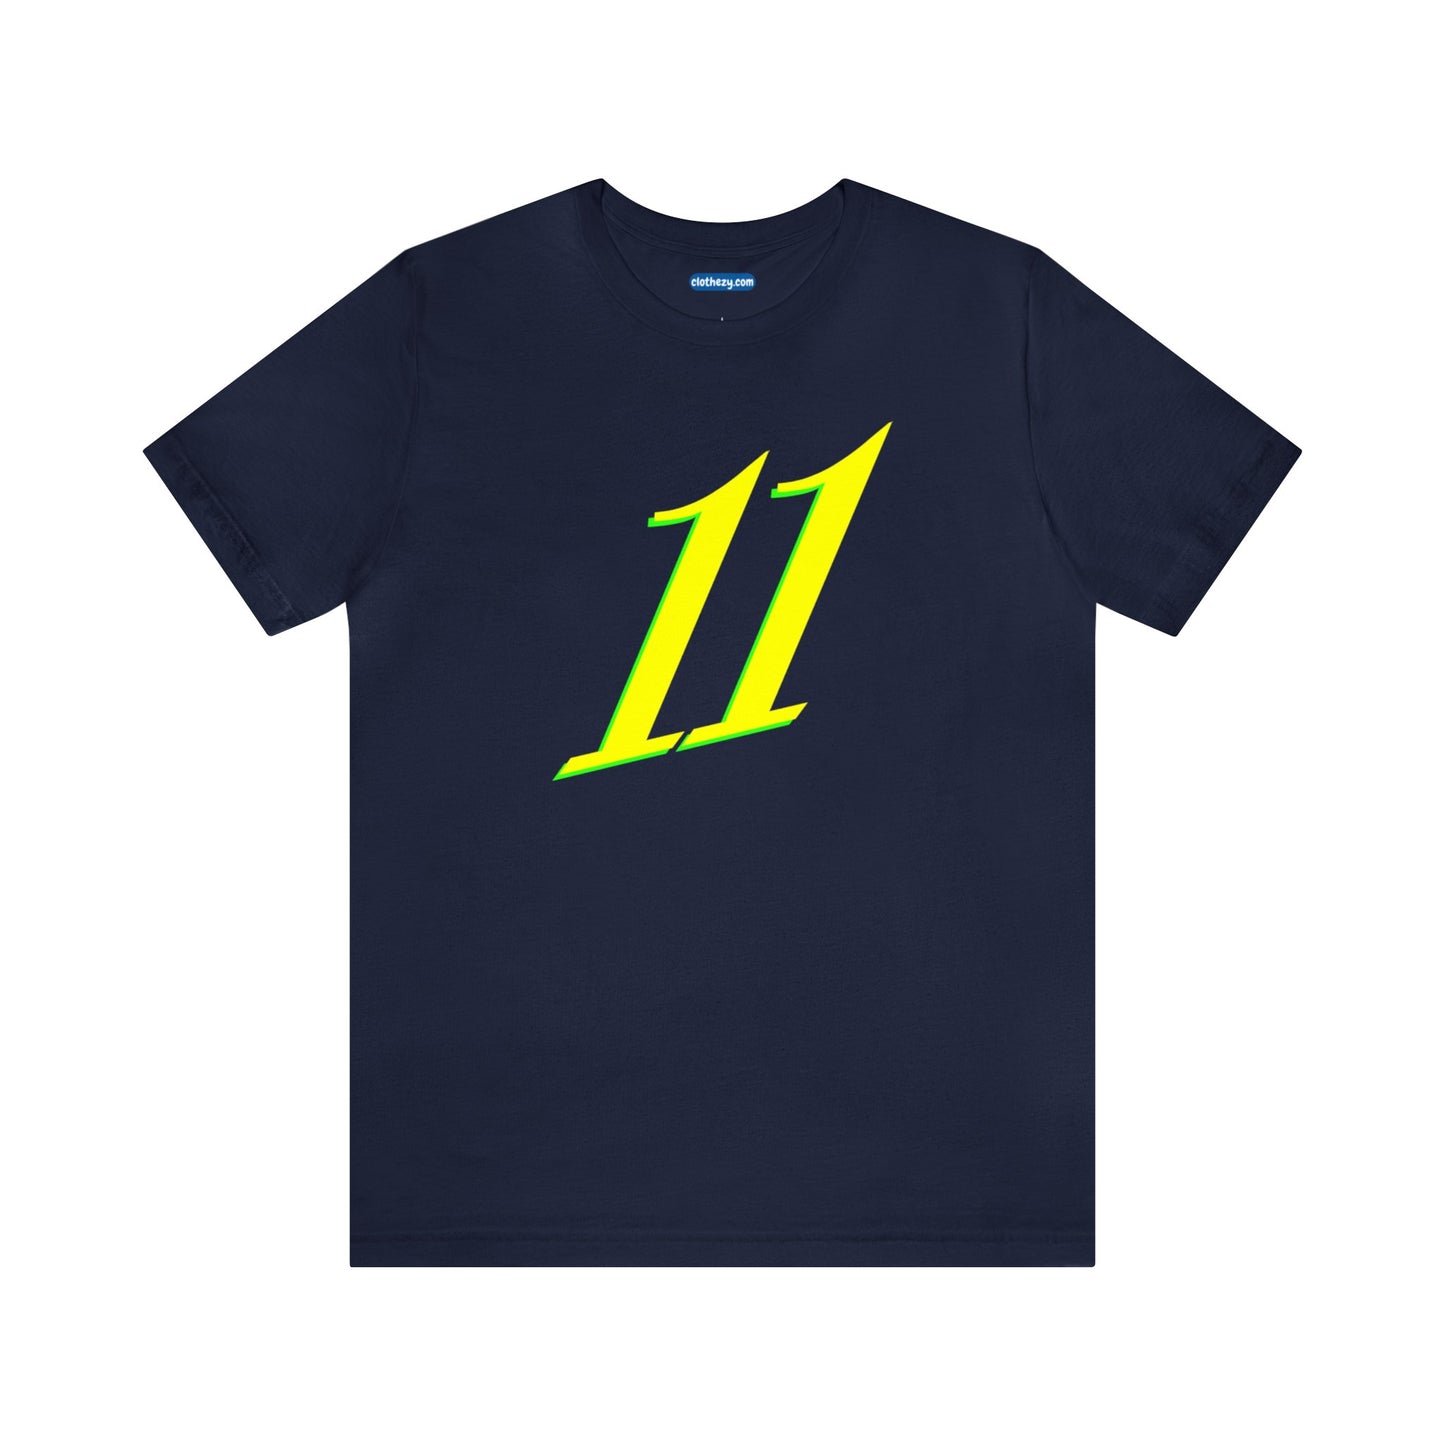 Number 11 Design - Soft Cotton Tee for birthdays and celebrations, Gift for friends and family, Multiple Options by clothezy.com in Navy Size Small - Buy Now